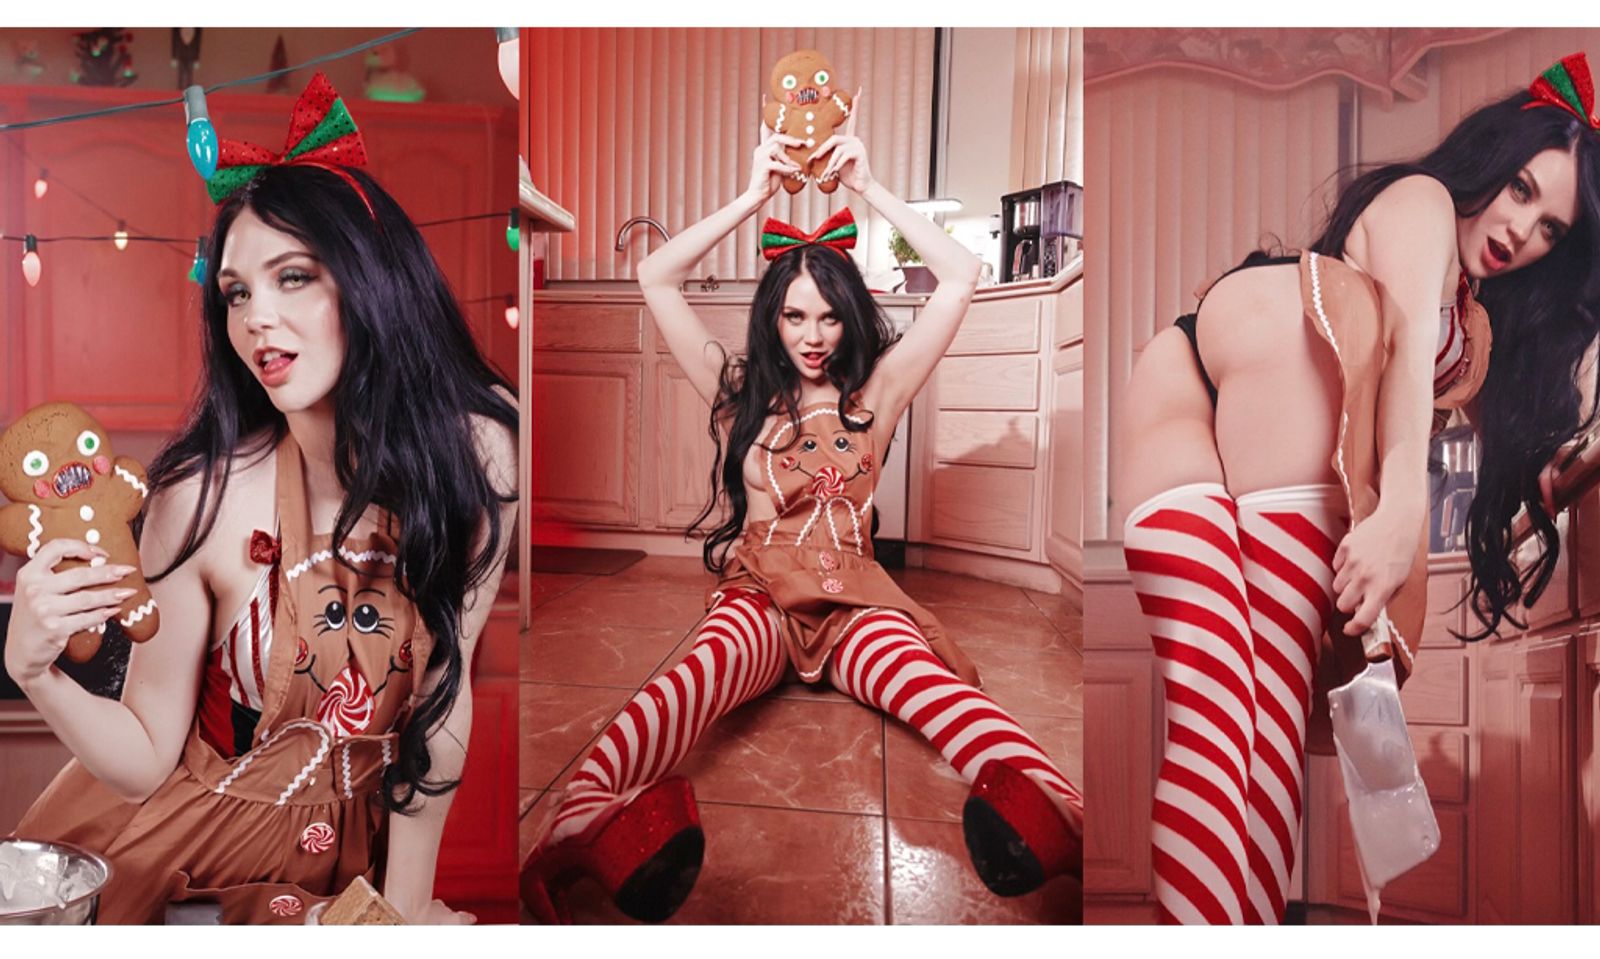 Catjira Releases Xmas-Themed Video & Vies to Win Pornhub Contest